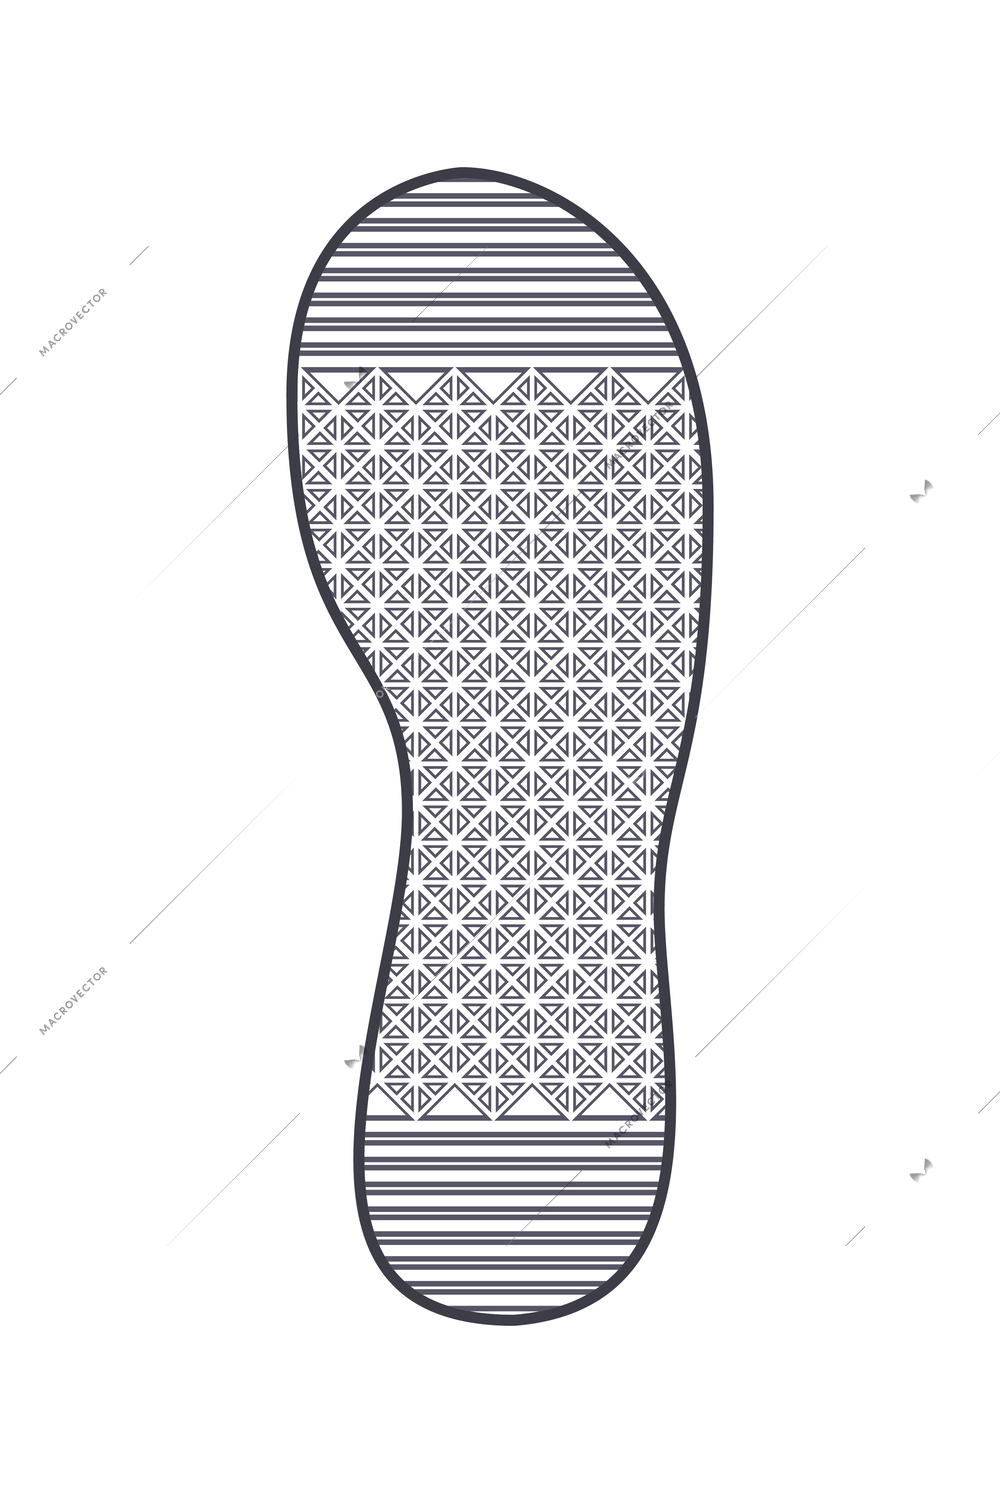 Monochrome sport shoe sole footprint with highly detailed pattern flat vector illustration